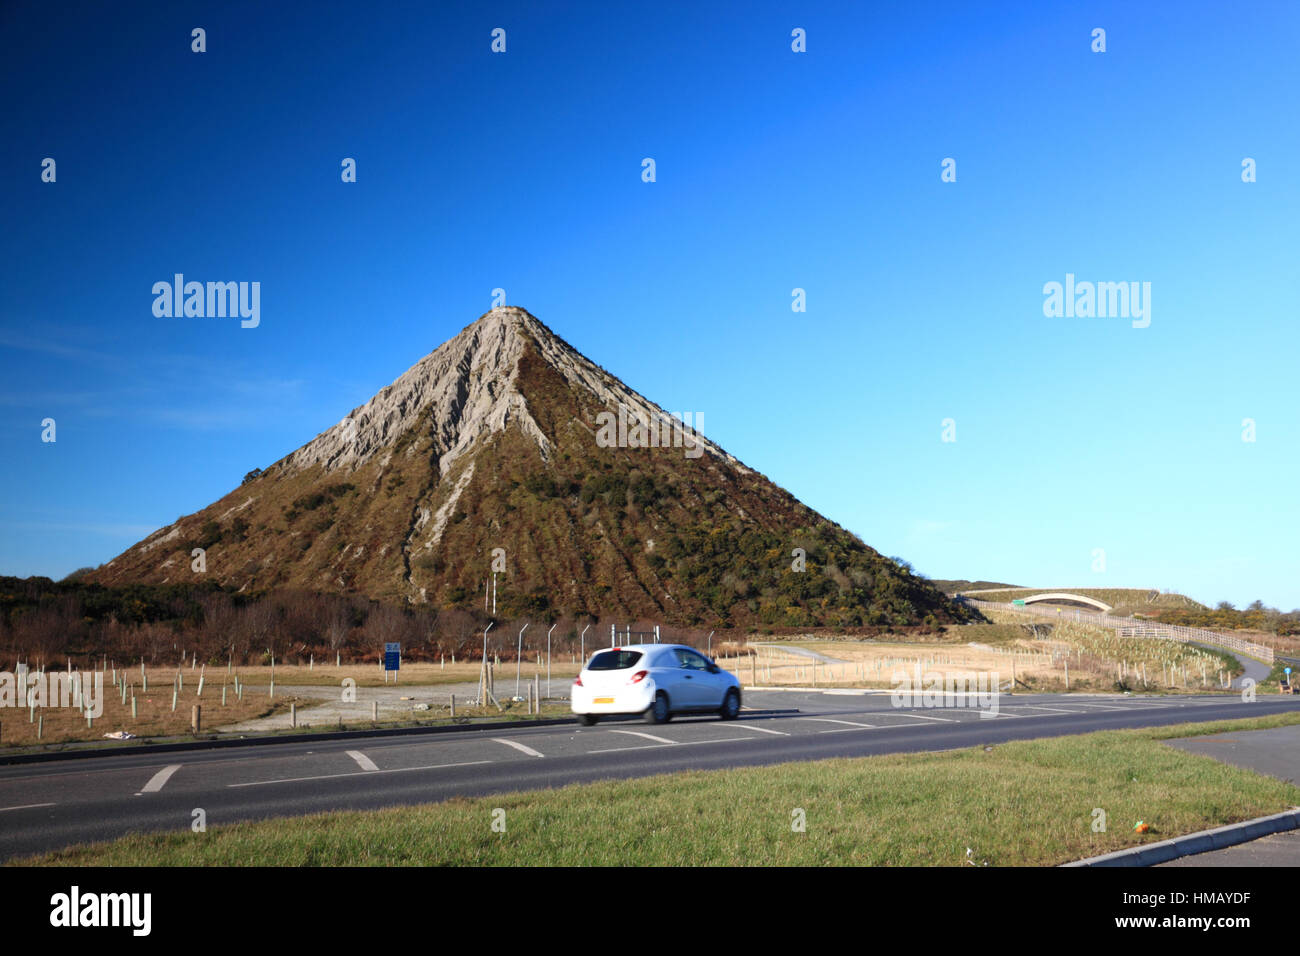 The Skytip, St Austell, Cornwall, is a pyramid of china clay waste typical of the landscape in the area 40 years ago.  Today the waste tips are landsc Stock Photo